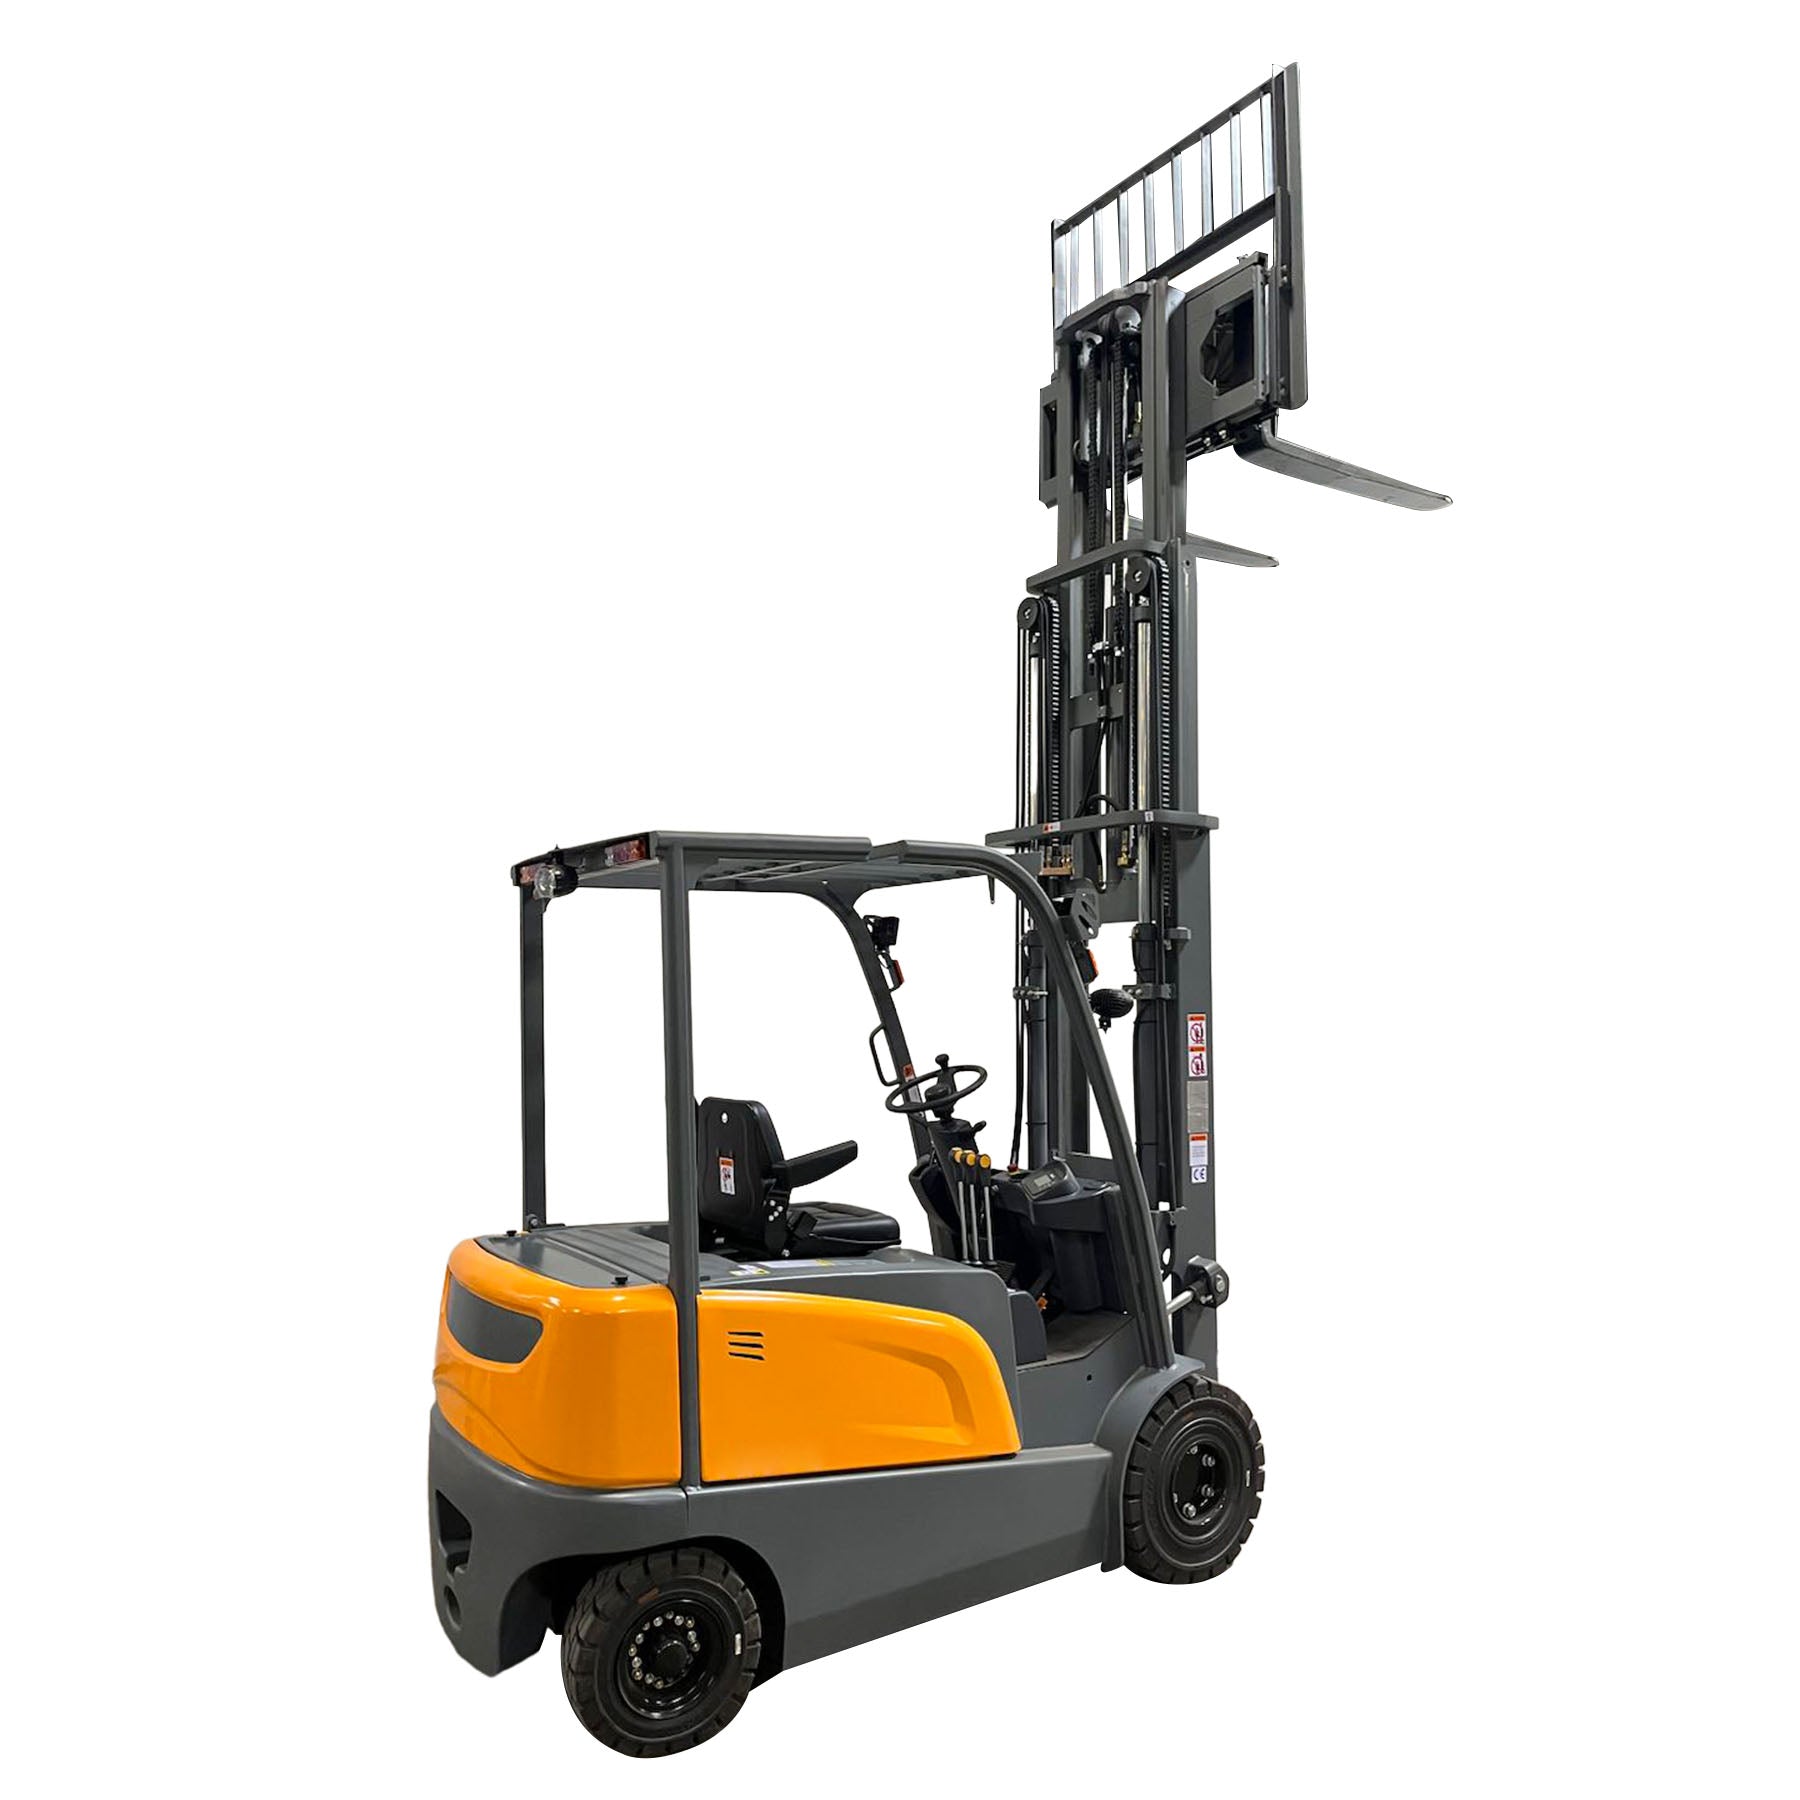 ApolloLift | Lead acid Battery 4-wheel Electric Forklift 6600lbs Cap. 197" Lifting A-4014